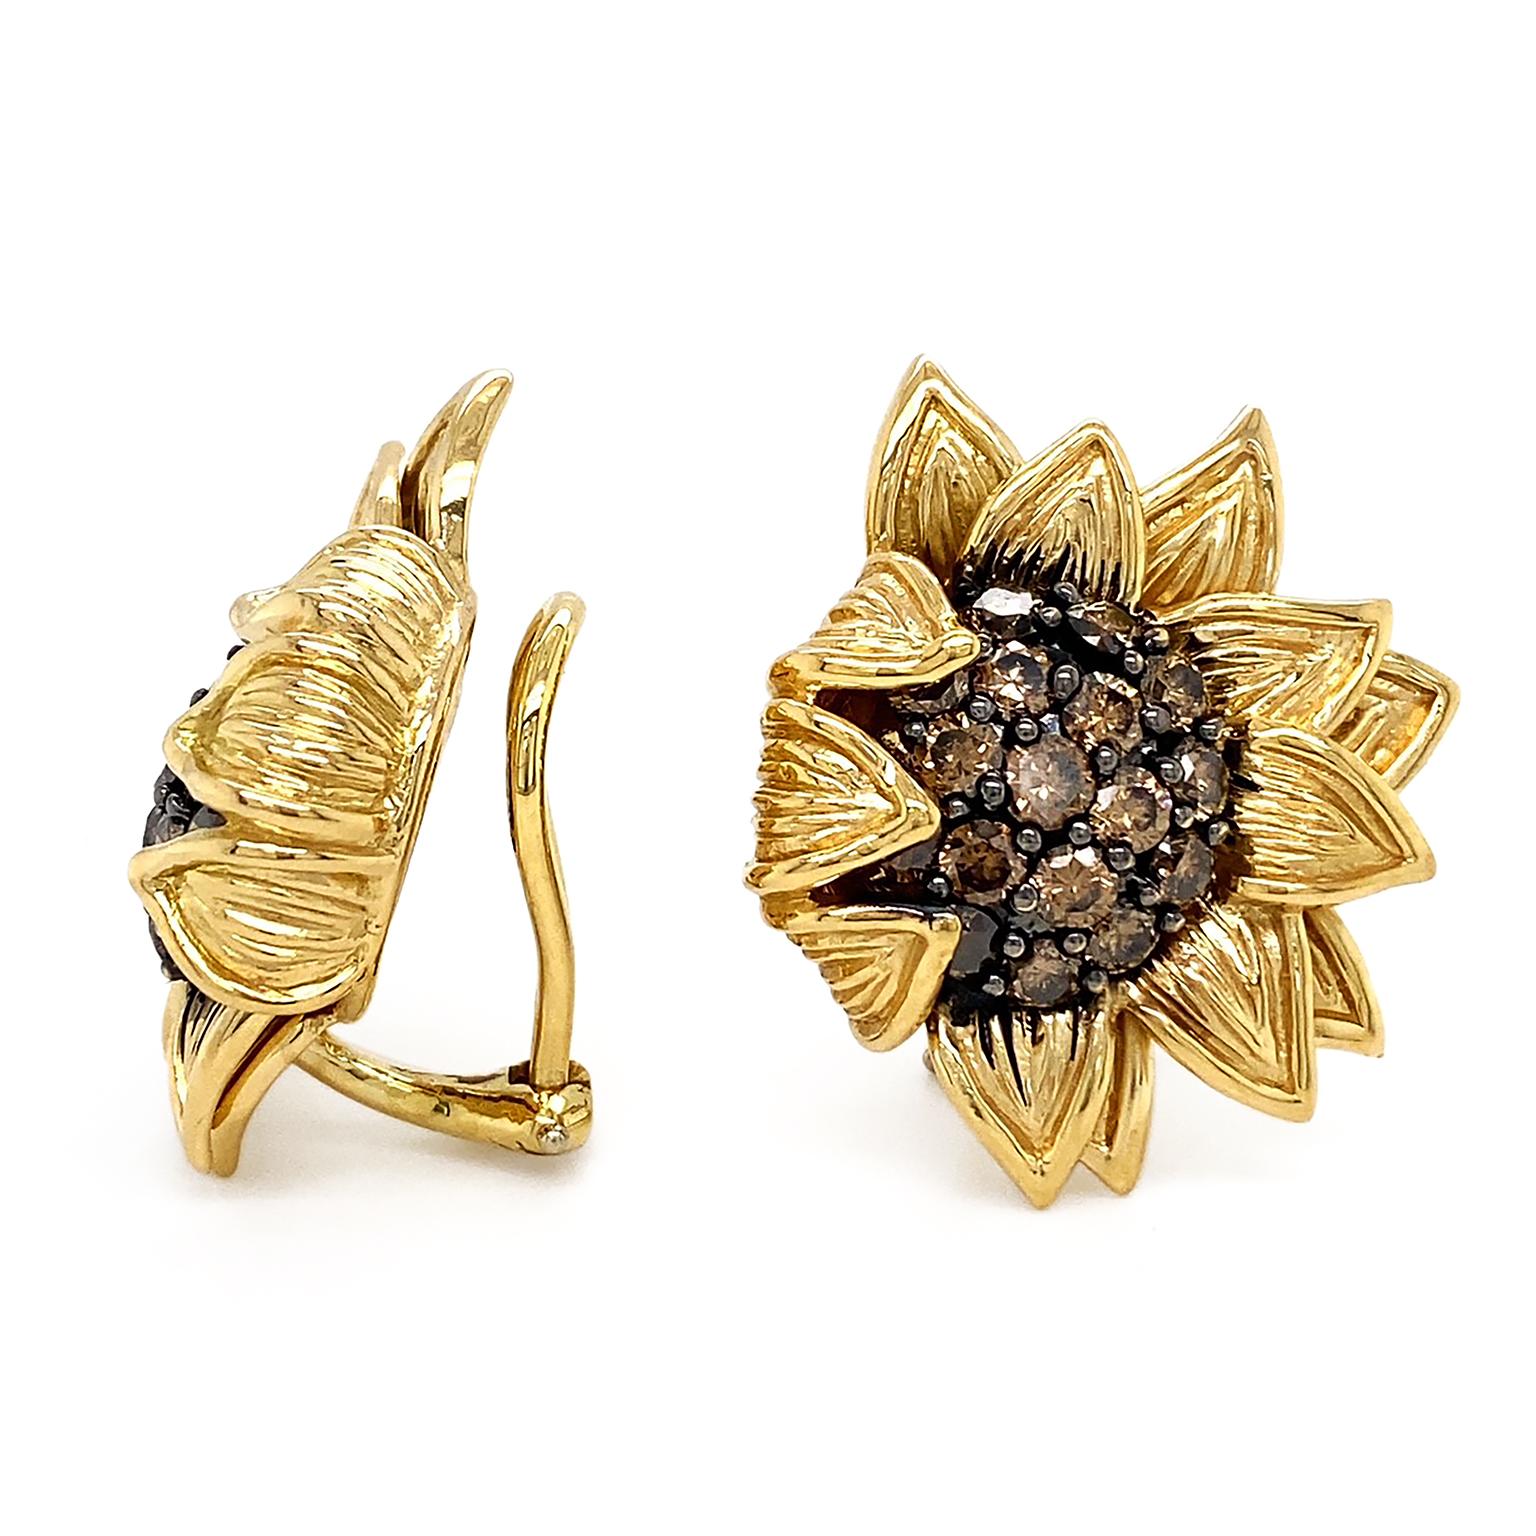 Inspired by the natural beauty of sunflowers, 18k yellow gold petals are textured and arranged in an overlapping pattern. A few of the petals fold over for added harmony. A total of 34 round cognac diamonds produce radiance in the center of the